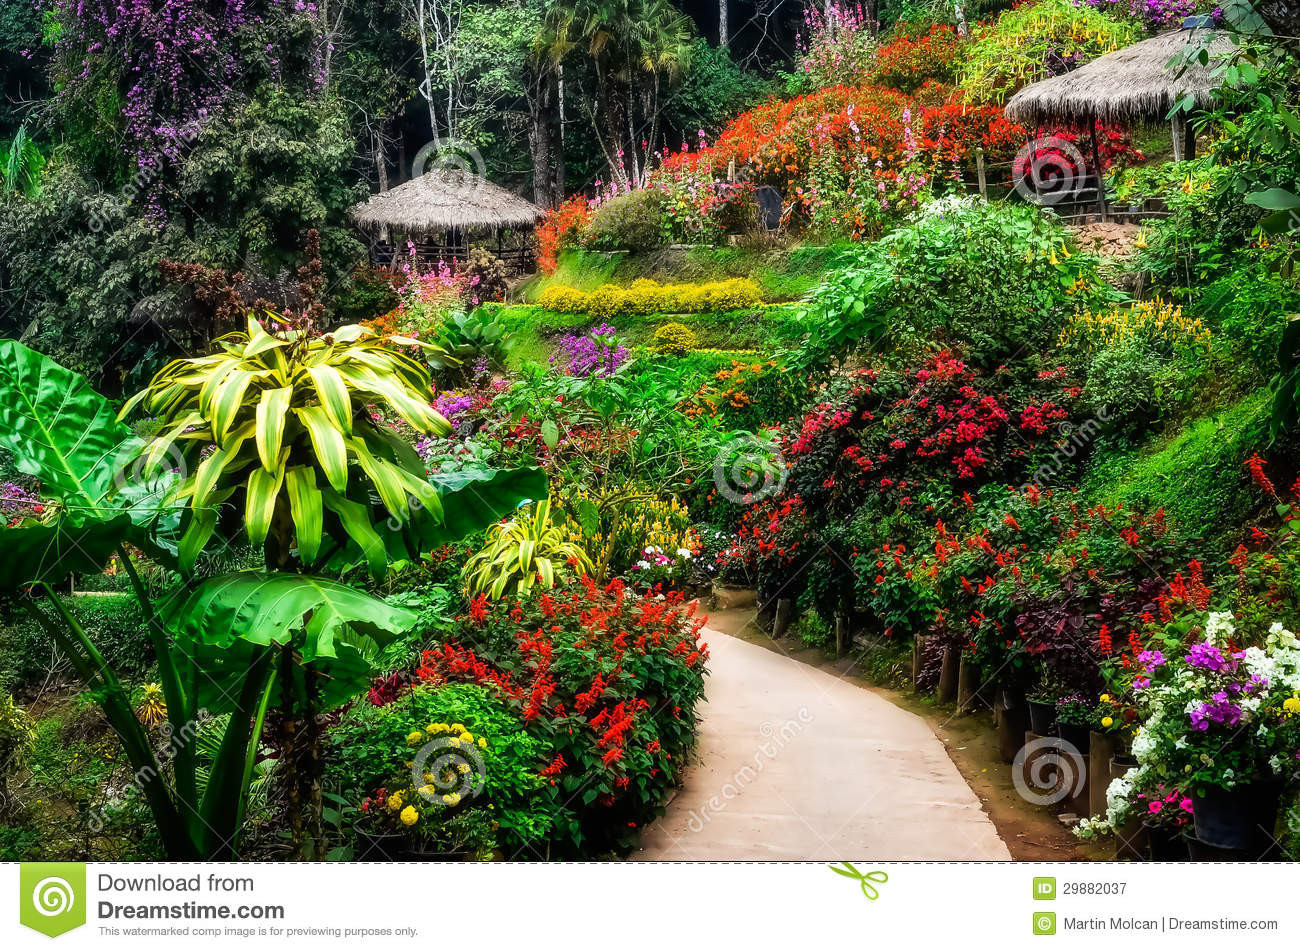 Outdoor Landscape Flowers
 Landscaped Colorful And Peaceful Flower Garden In Blossom